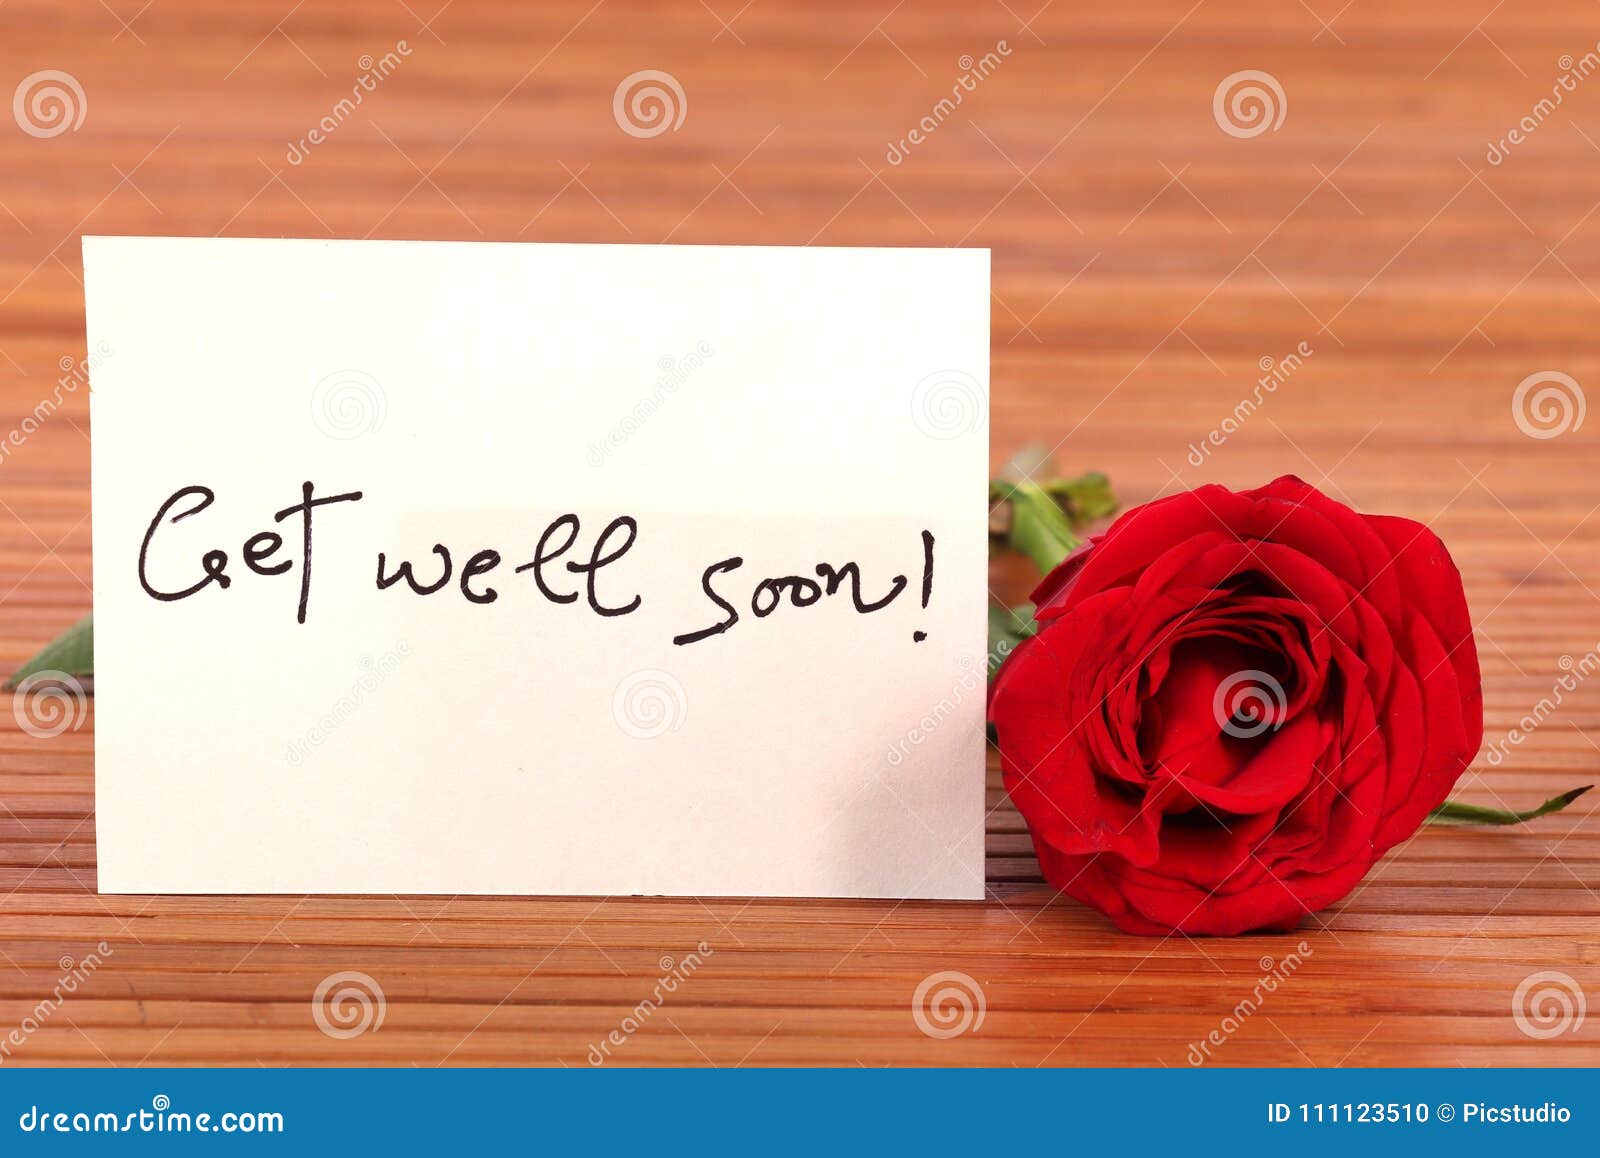 Get well soon stock photo. Image of flower, nature, chit - 111123510